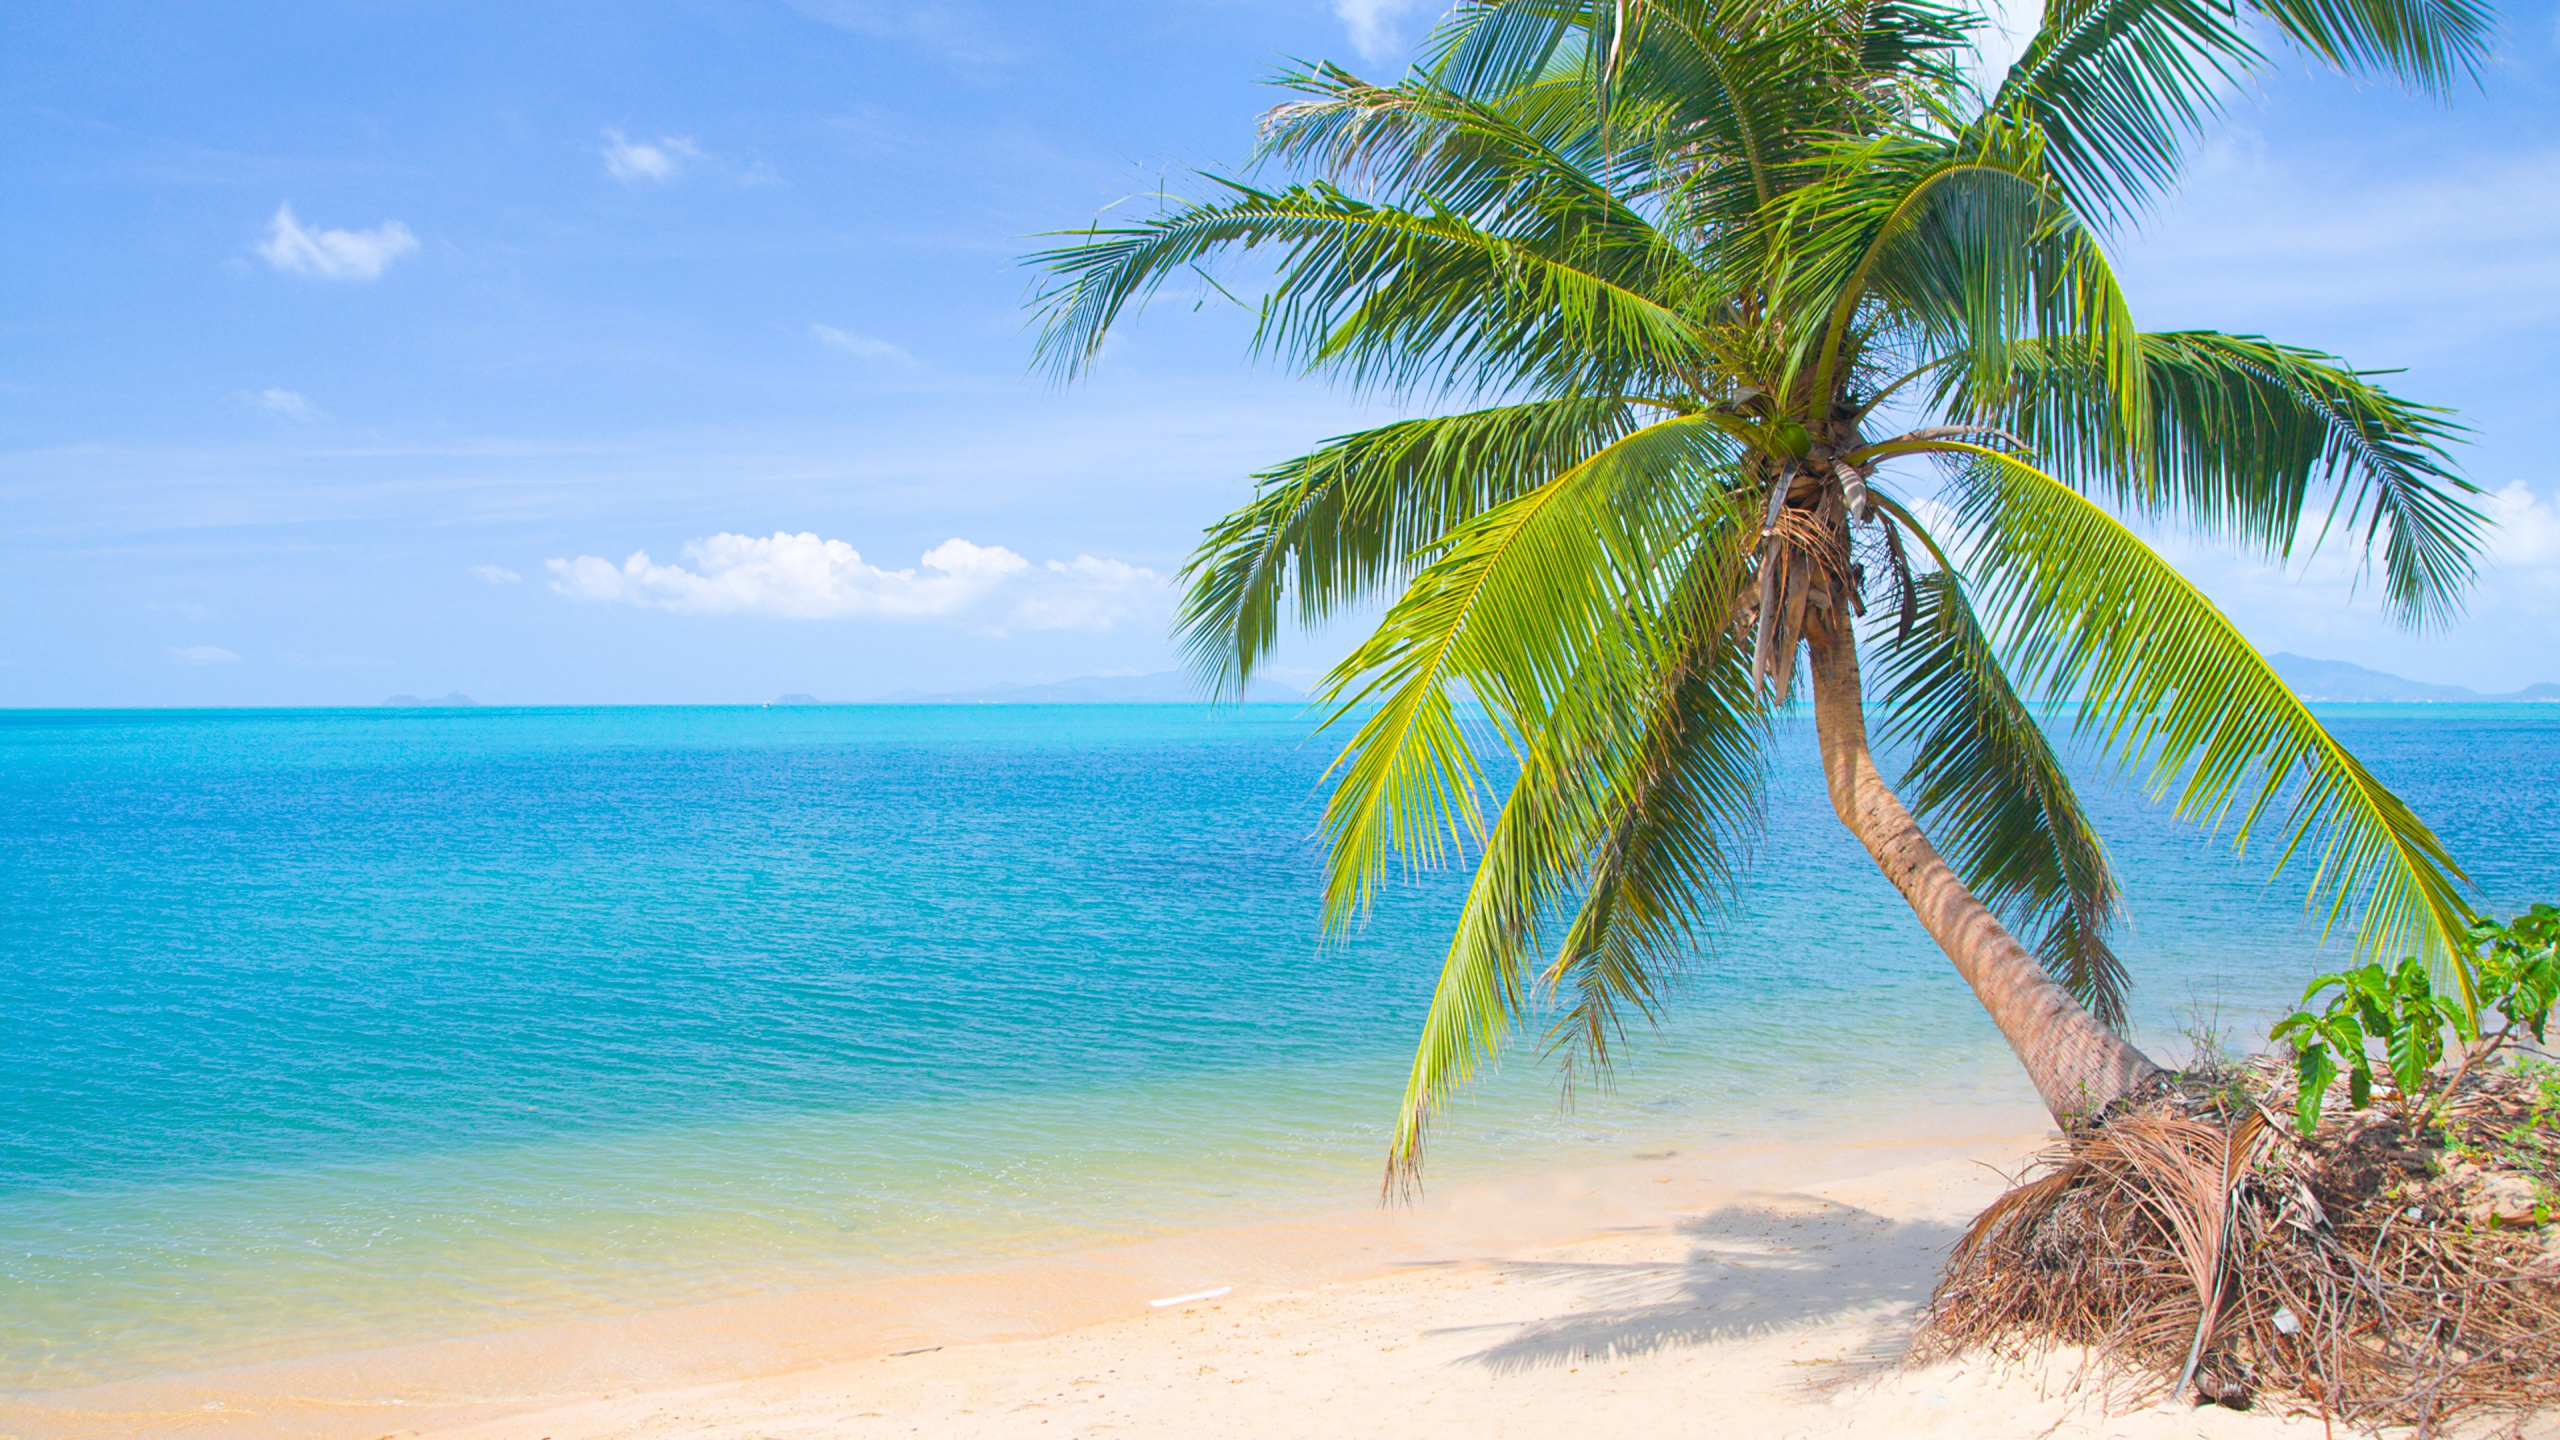 Green Palm Tree on Beach During Daytime. Wallpaper in 2560x1440 Resolution